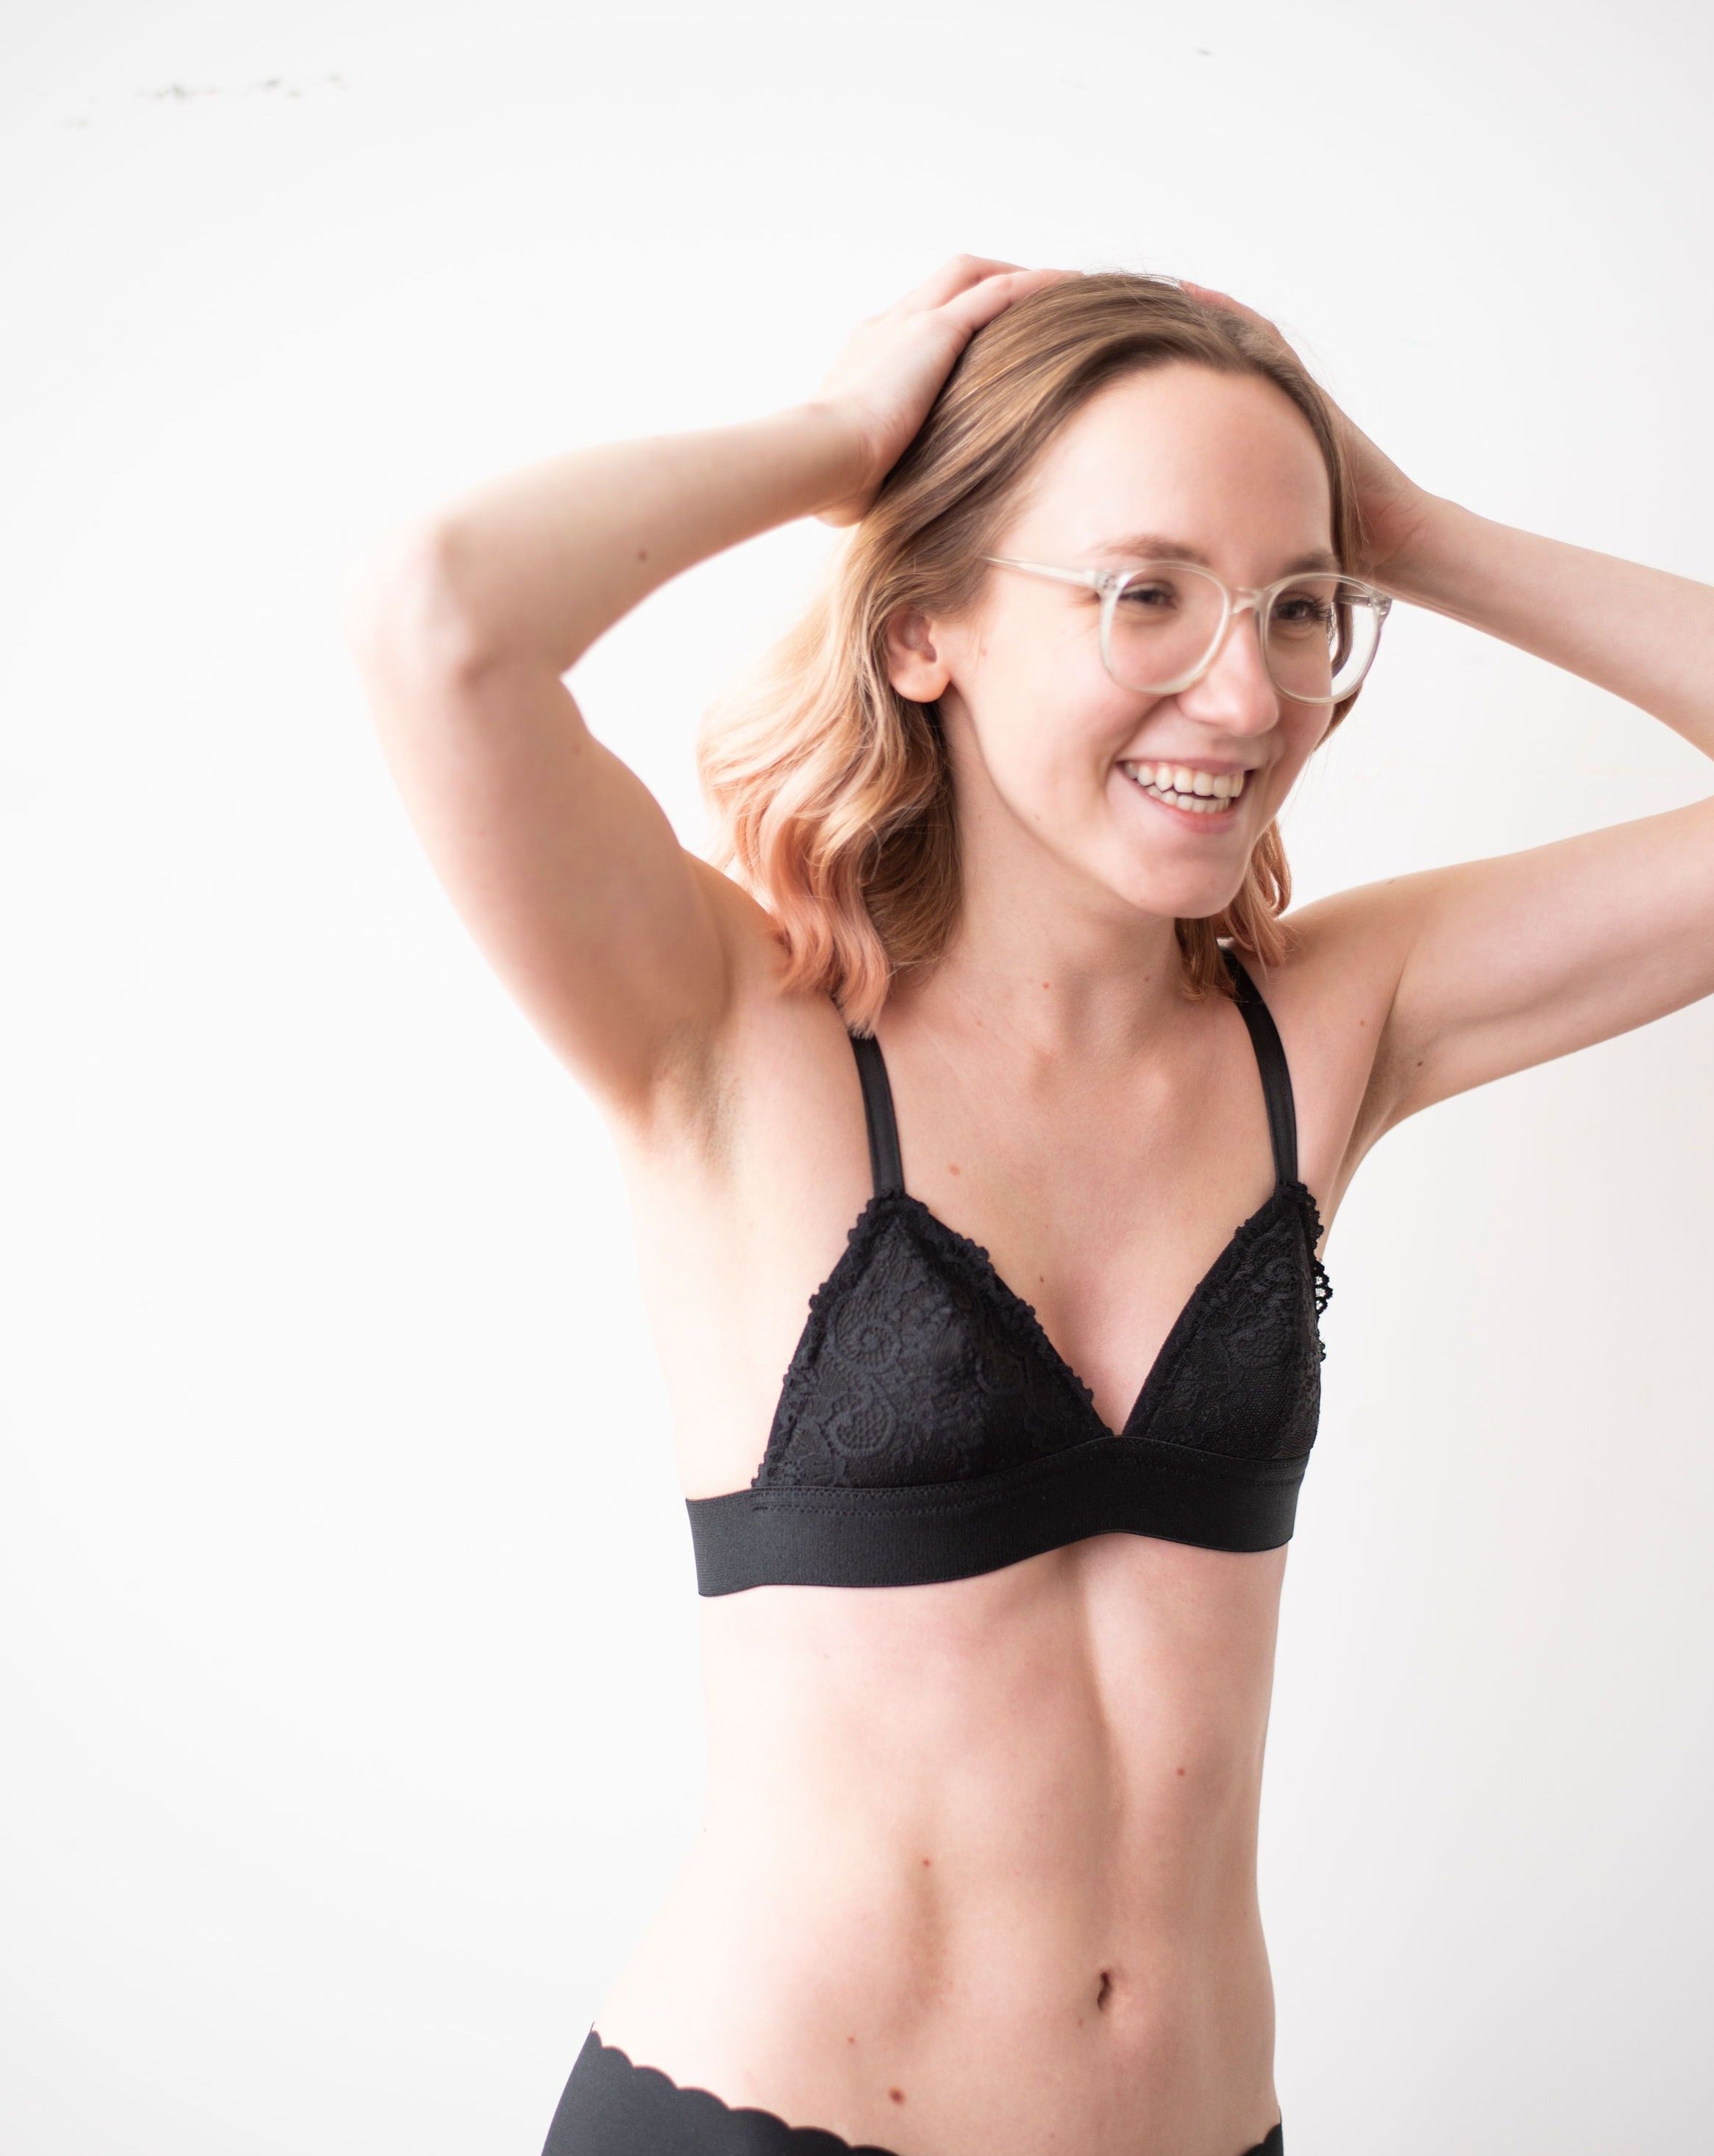 Haley from Rubies Bras, a female with medium blond hair wearing a peach and white wirefree bra from our petites collection. Half body shot on white back drop.